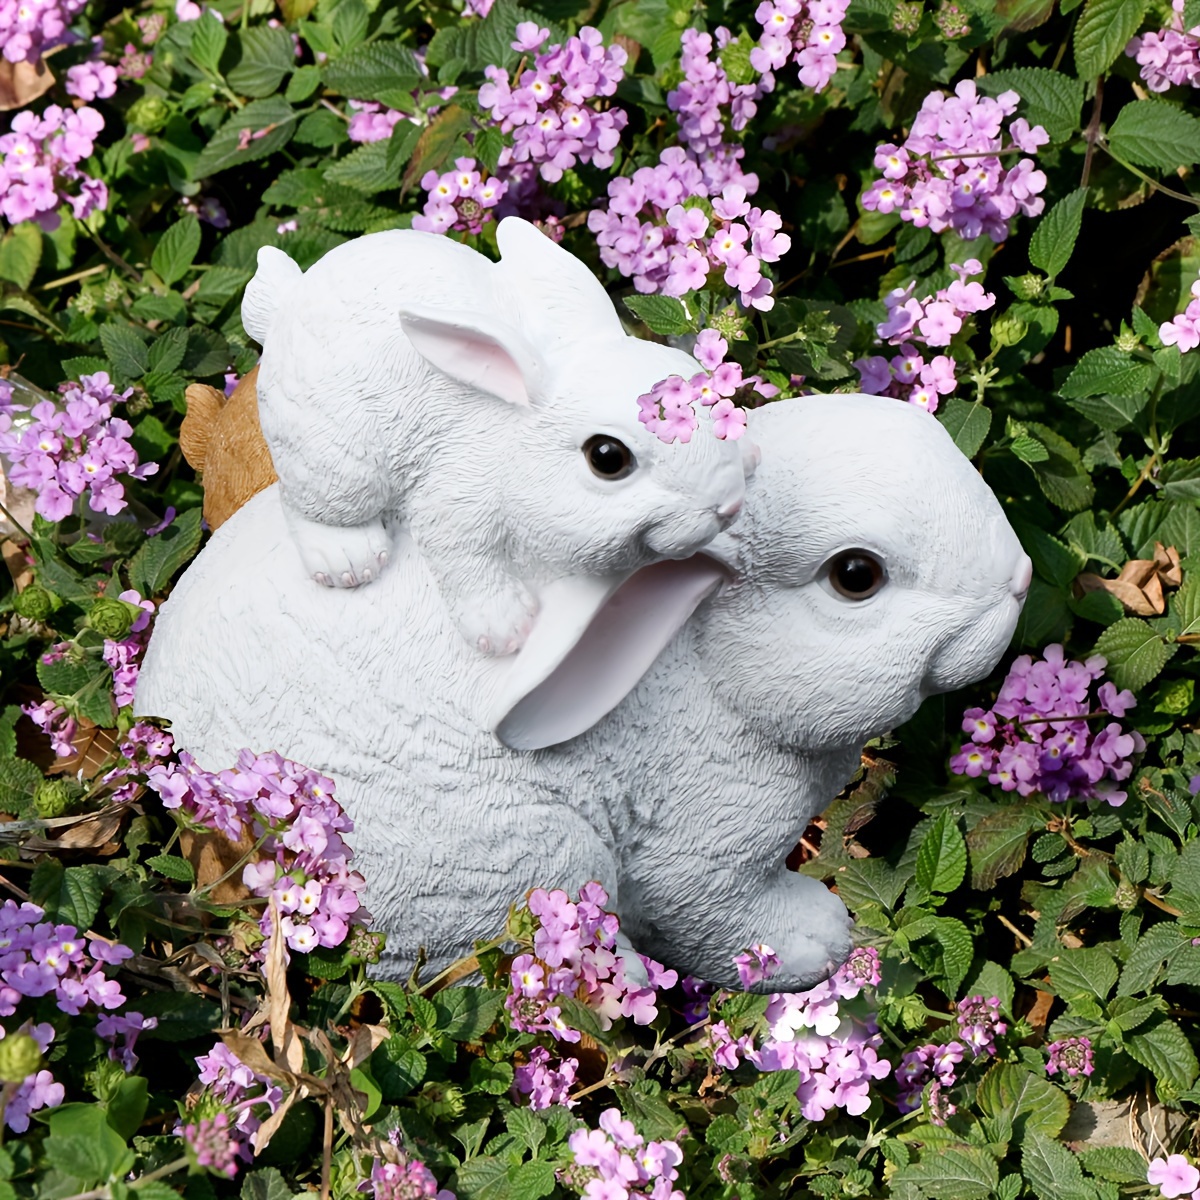 Bunny Statue Garden Statues Rabbit Figurines Decor Outdoor Polyresin Easter  Decorations Bunnies Gifts Home House Kitchen Figurine Patio Lawn Yard Art